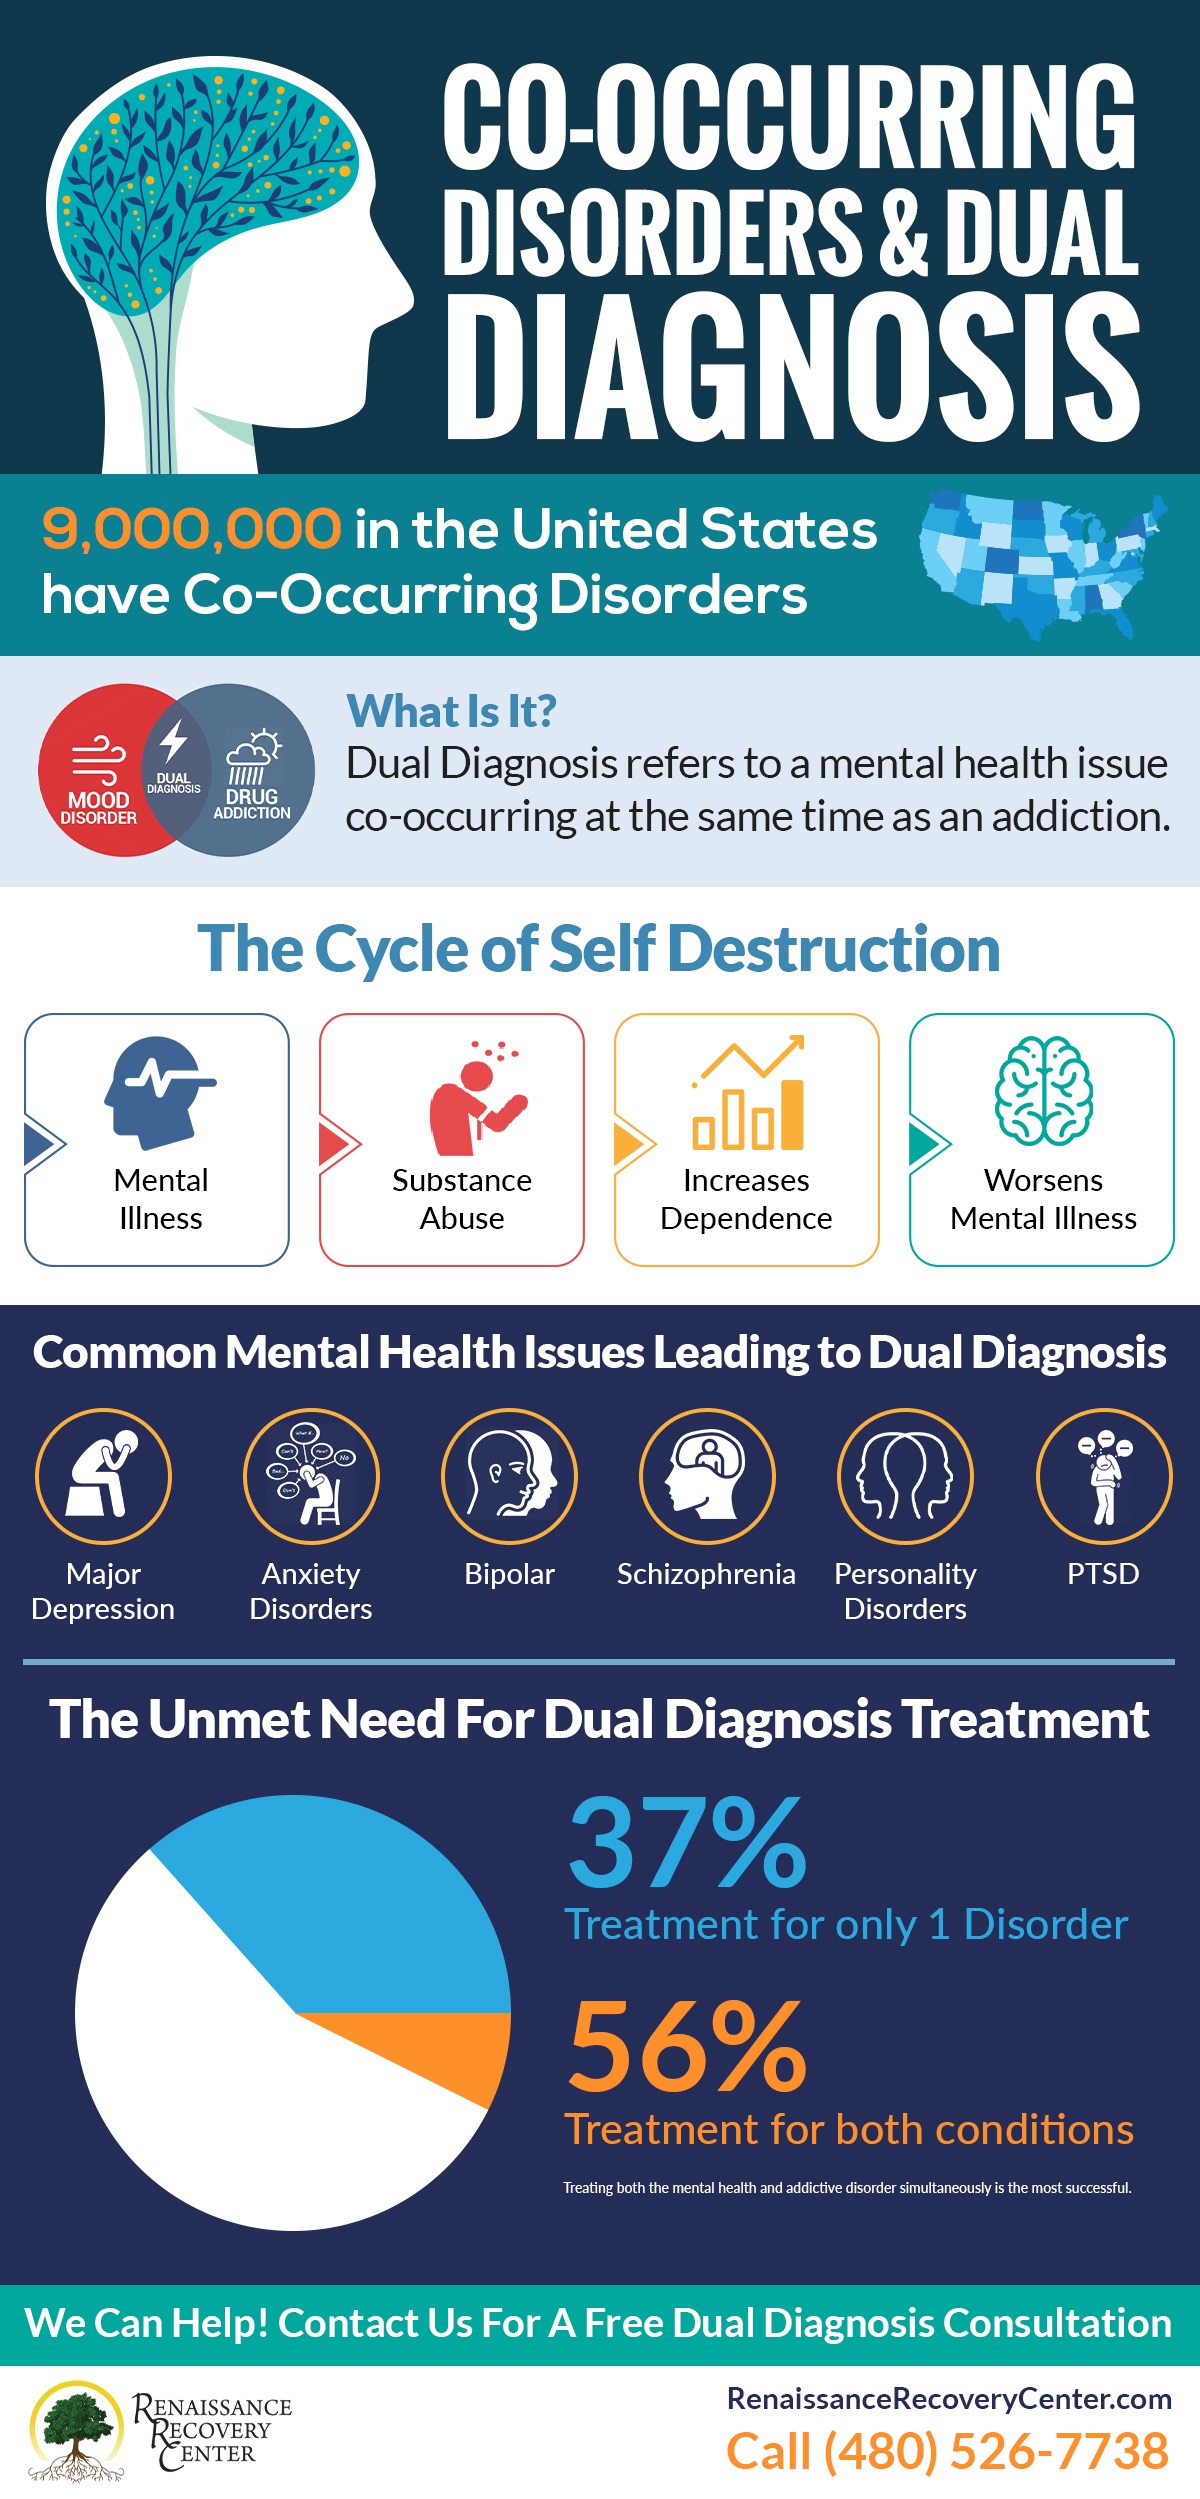 What is Dual Diagnosis in Mental Health?